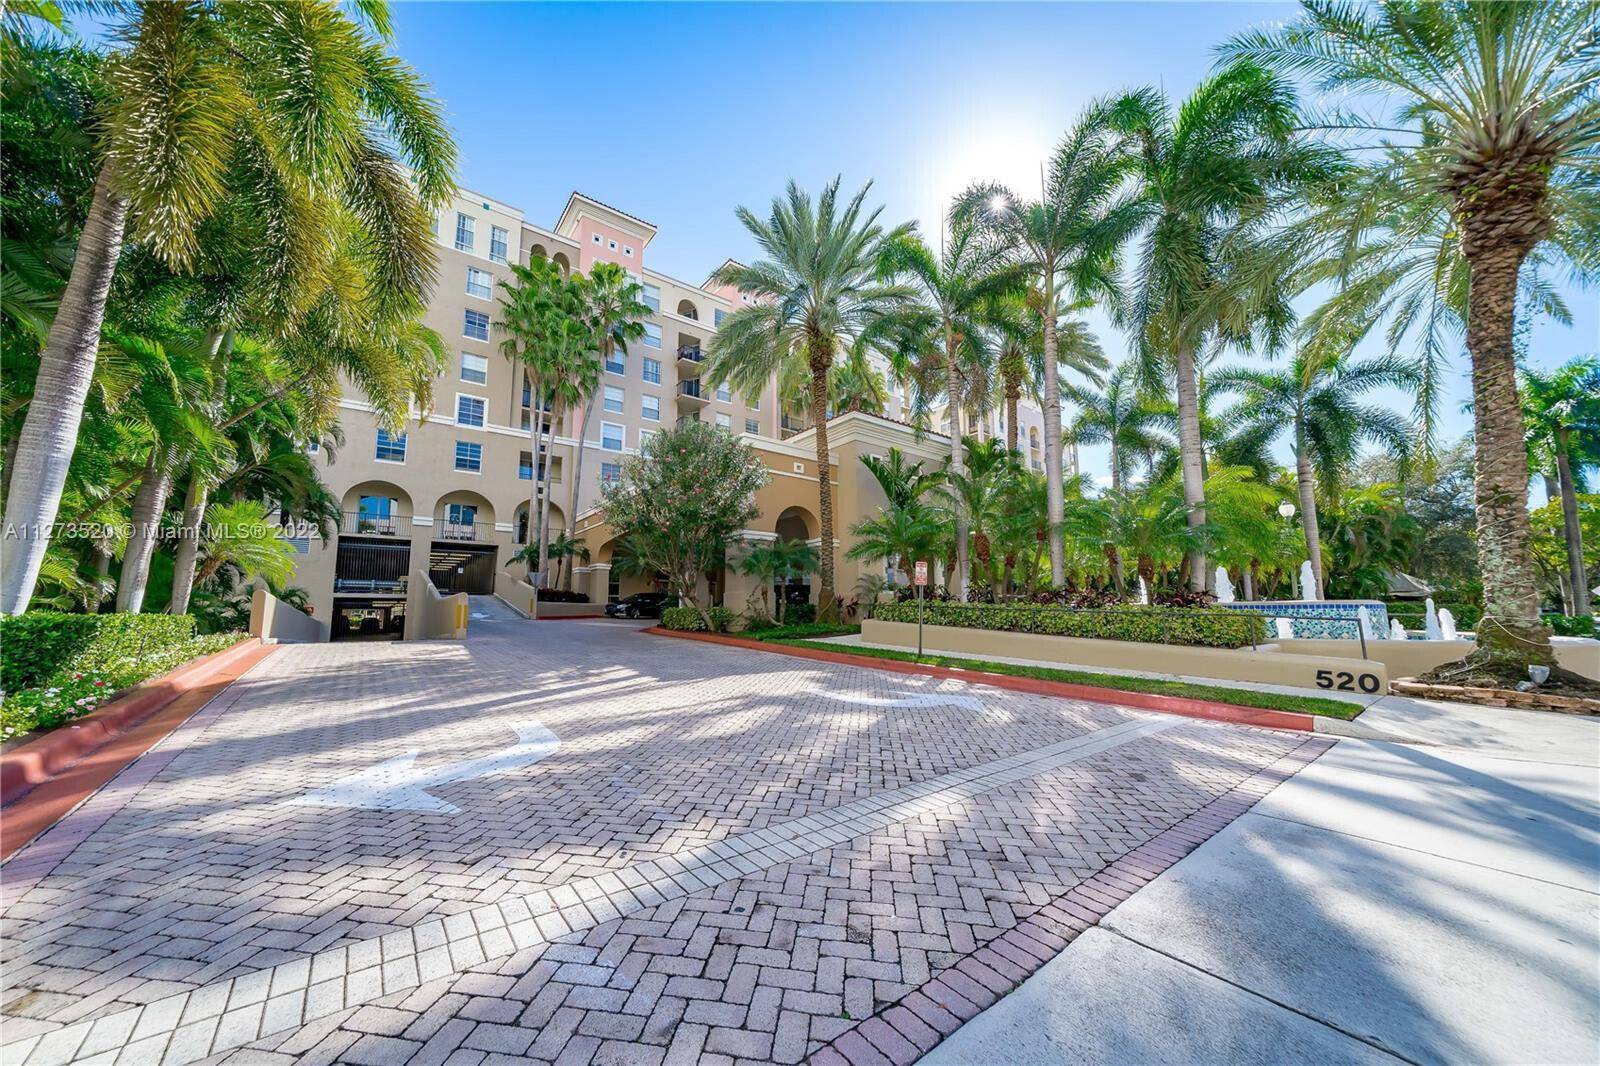 Live the downtown Fort Lauderdale lifestyle in this 2 2 condo with balcony in the luxurious Las Olas by the River condominium.